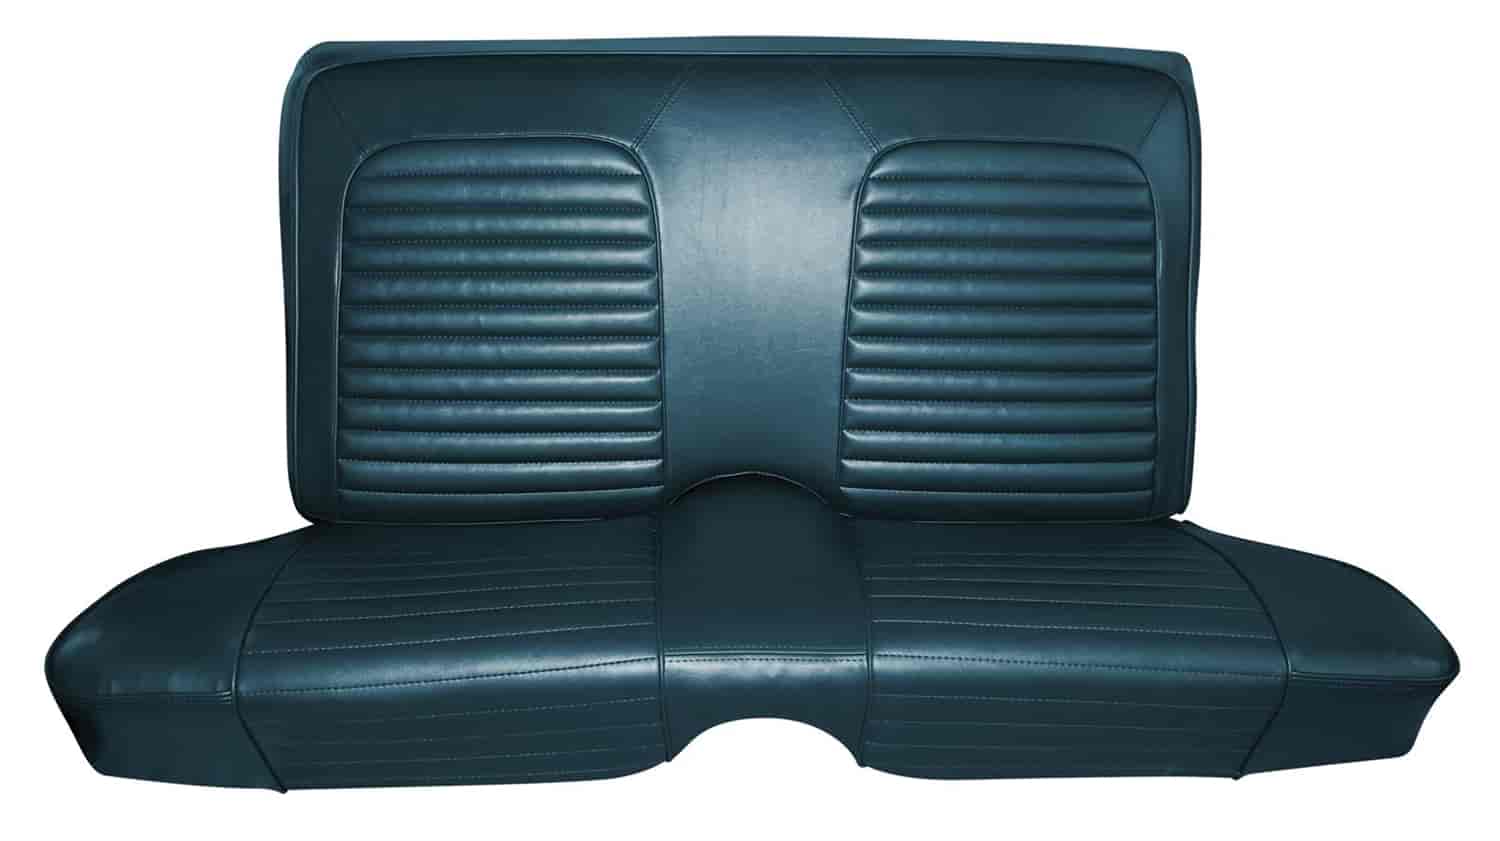 1964 Ford Falcon Futura 2-Door Hardtop Two-Tone Deluxe Interior Front Bucket and Rear Bench Seat Upholstery Set